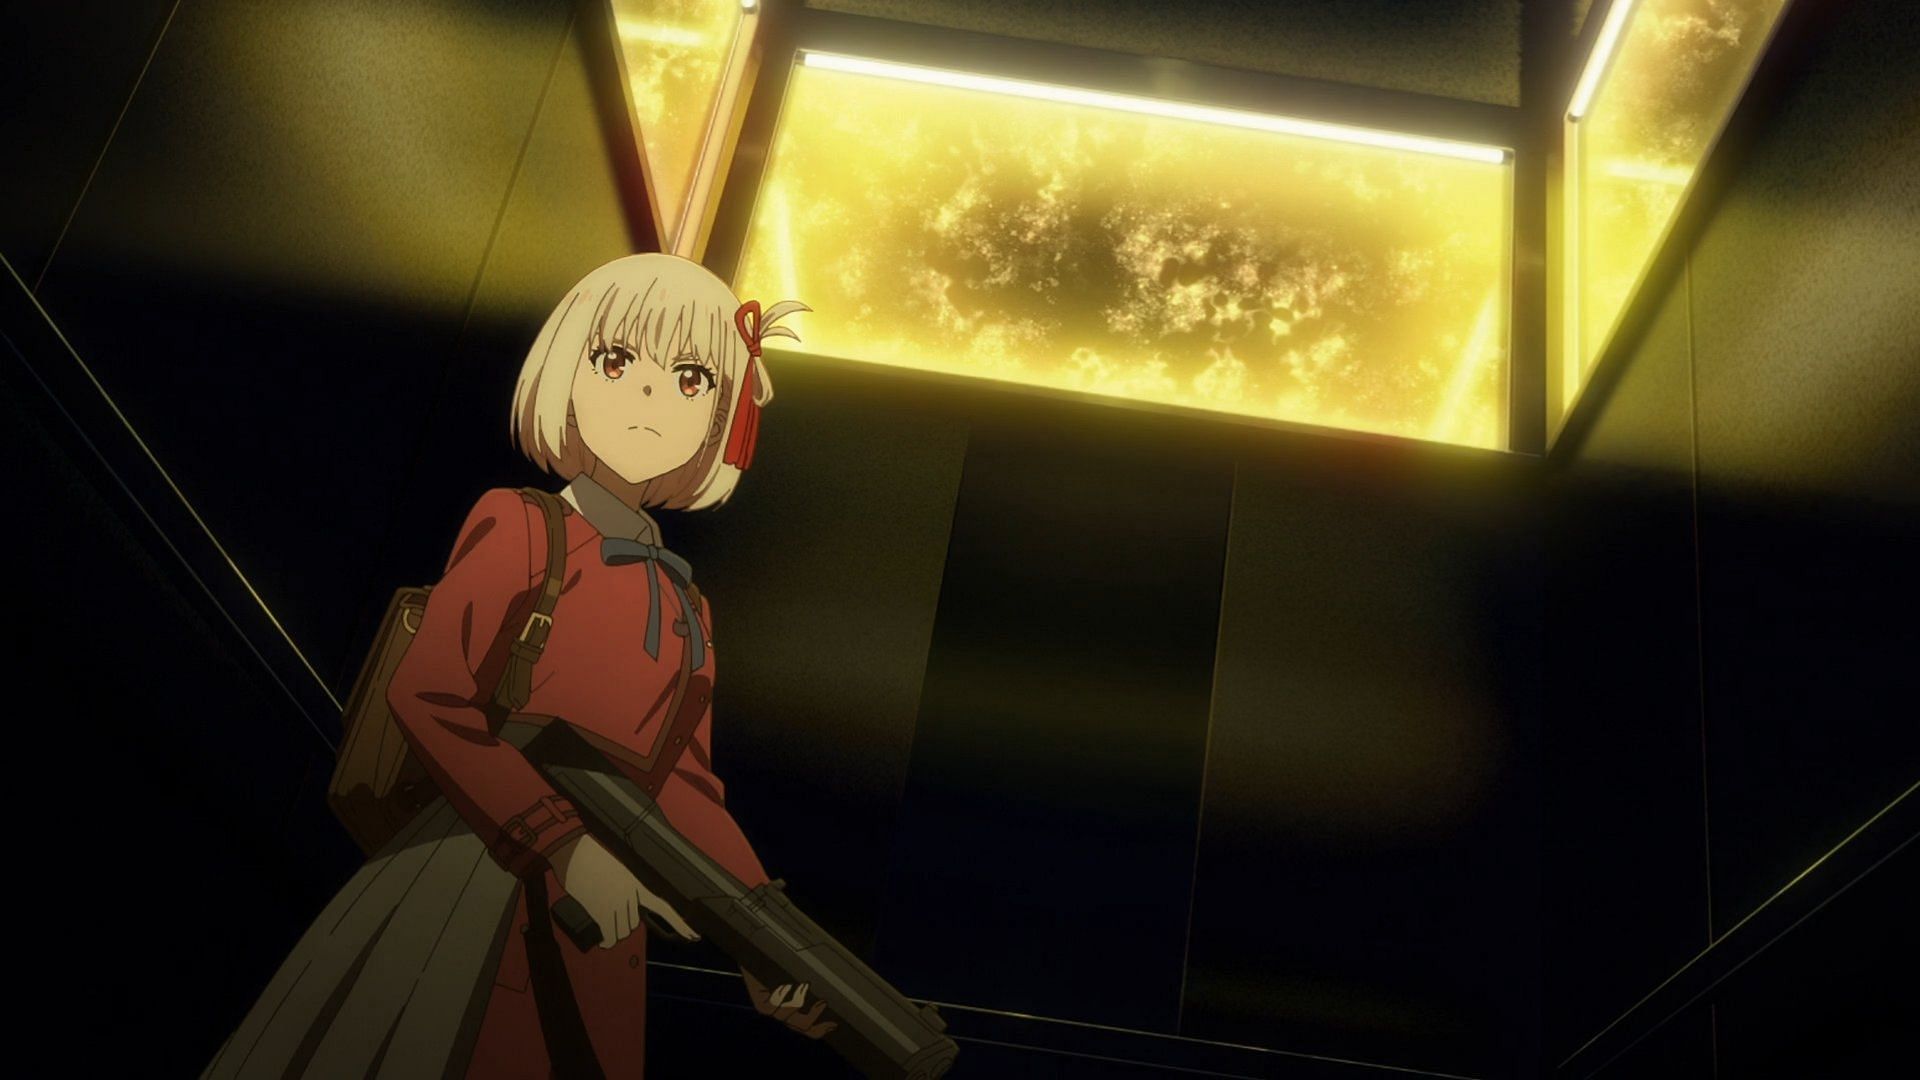 Chisato as seen in Lycoris Recoil Episode 11 (Image via A-1 Pictures)